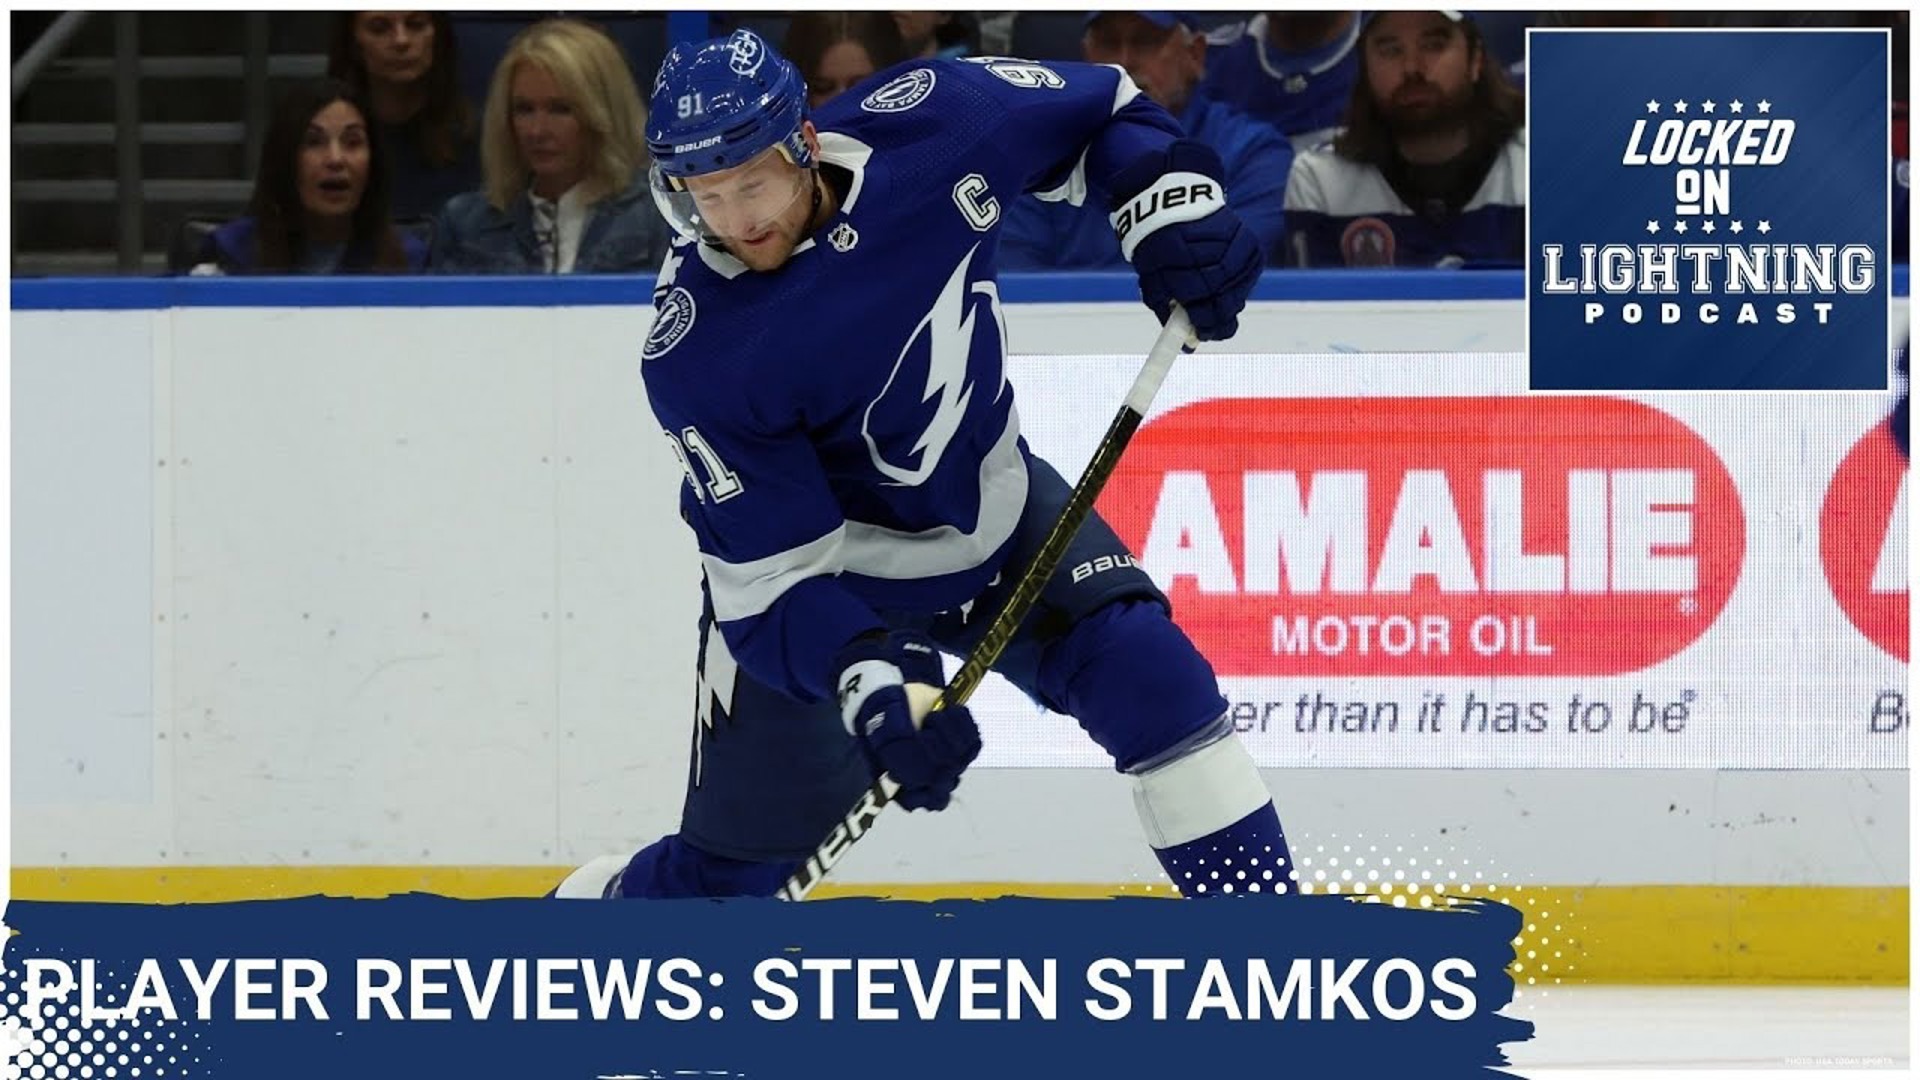 On today's episode we wrap up our player review segment with a look back on the season of Steven Stamkos.